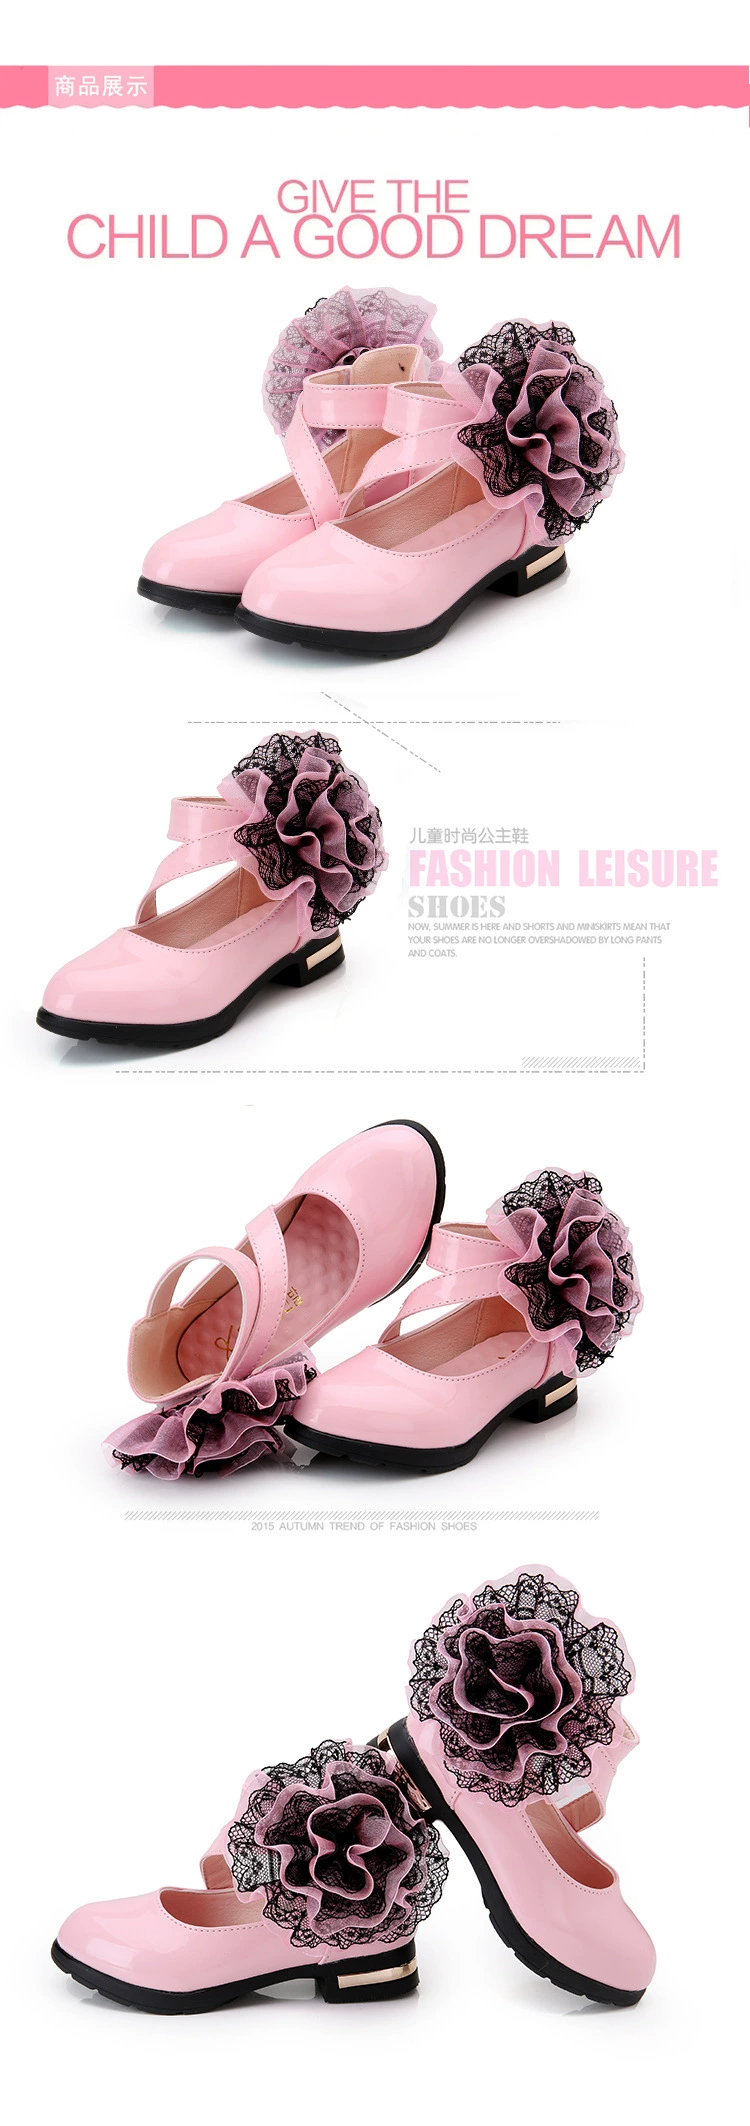 Kids Leather Shoes Girls Wedding Dress Shoes Children Princess Flower Leather Sandals For Girls Casual Dance Shoes Flat Sandals child shoes girl